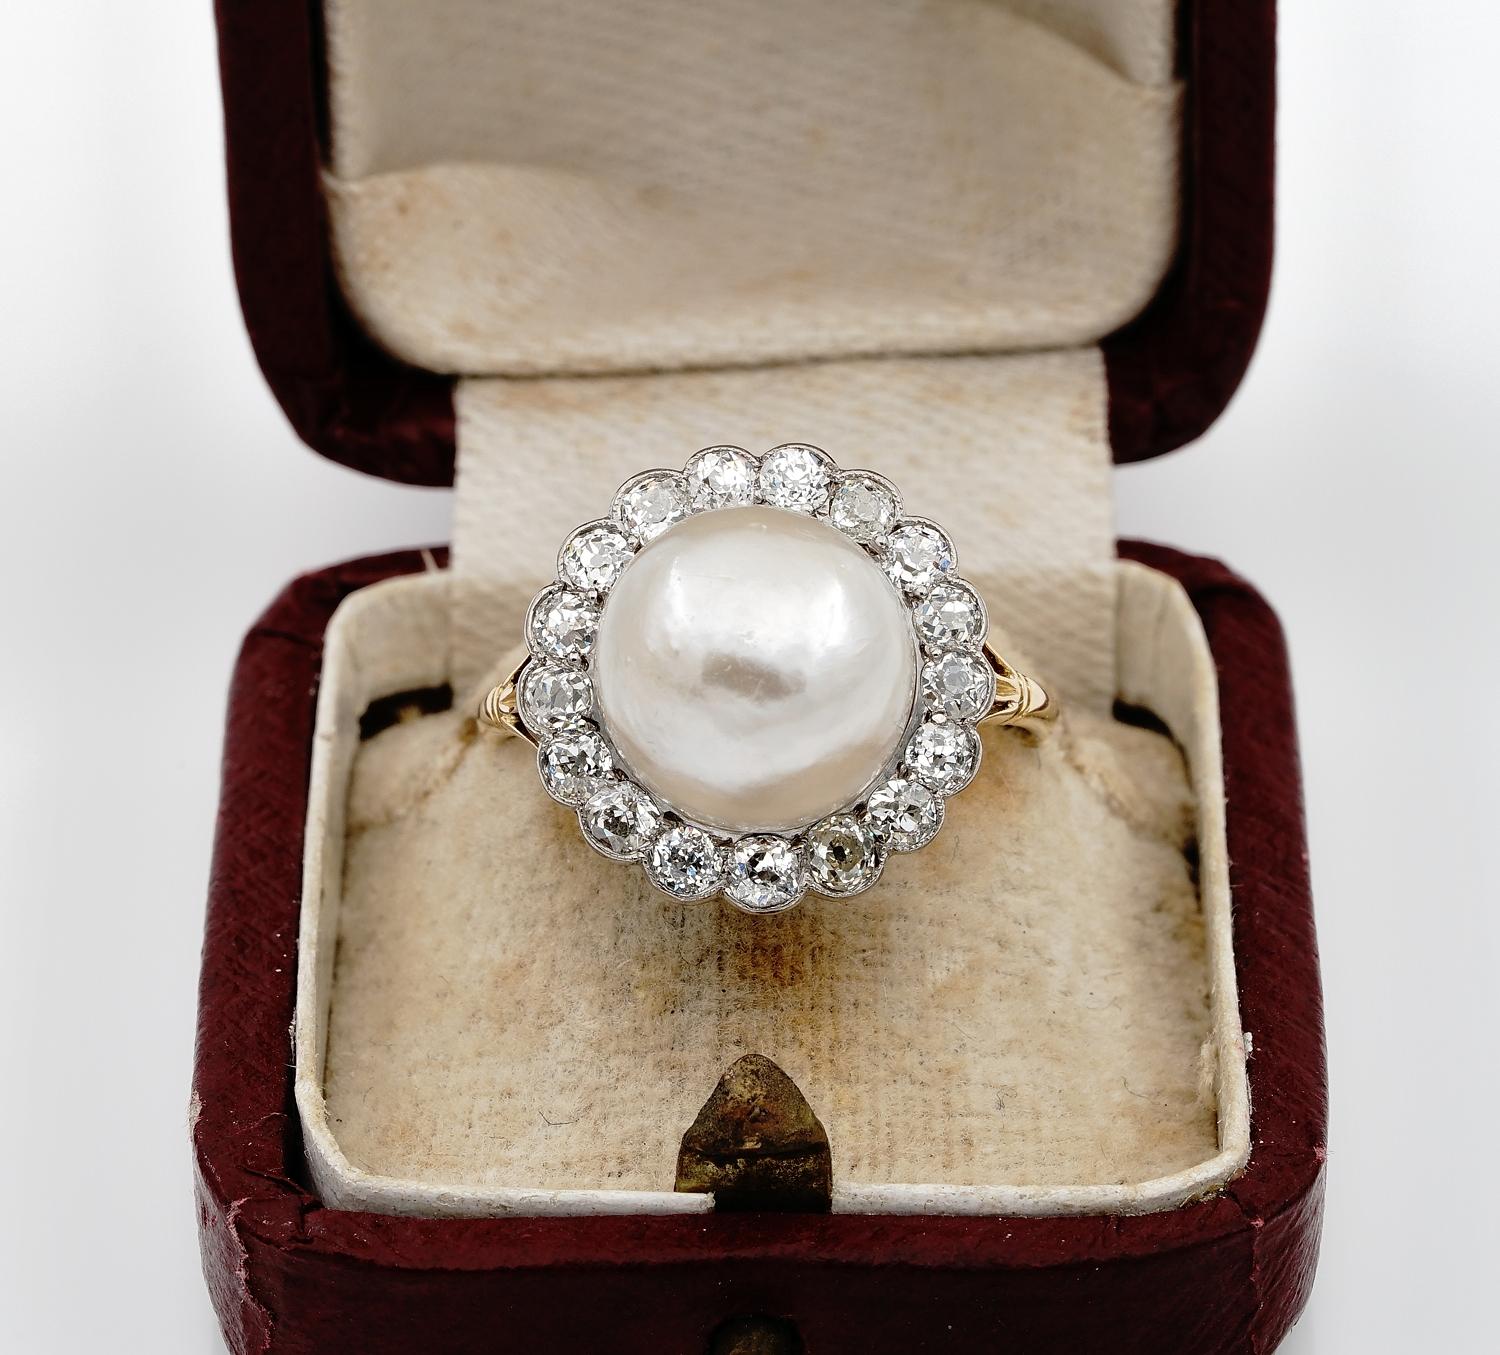 The Queen of Seas
Prized for millennia, pearls are organic gems with strong associations with the Moon, great value, and weddings
Emblem of Purity, rewarded in history by Kings and Queens
Rare and extremely fine is this pure Edwardian ring, 1900/09